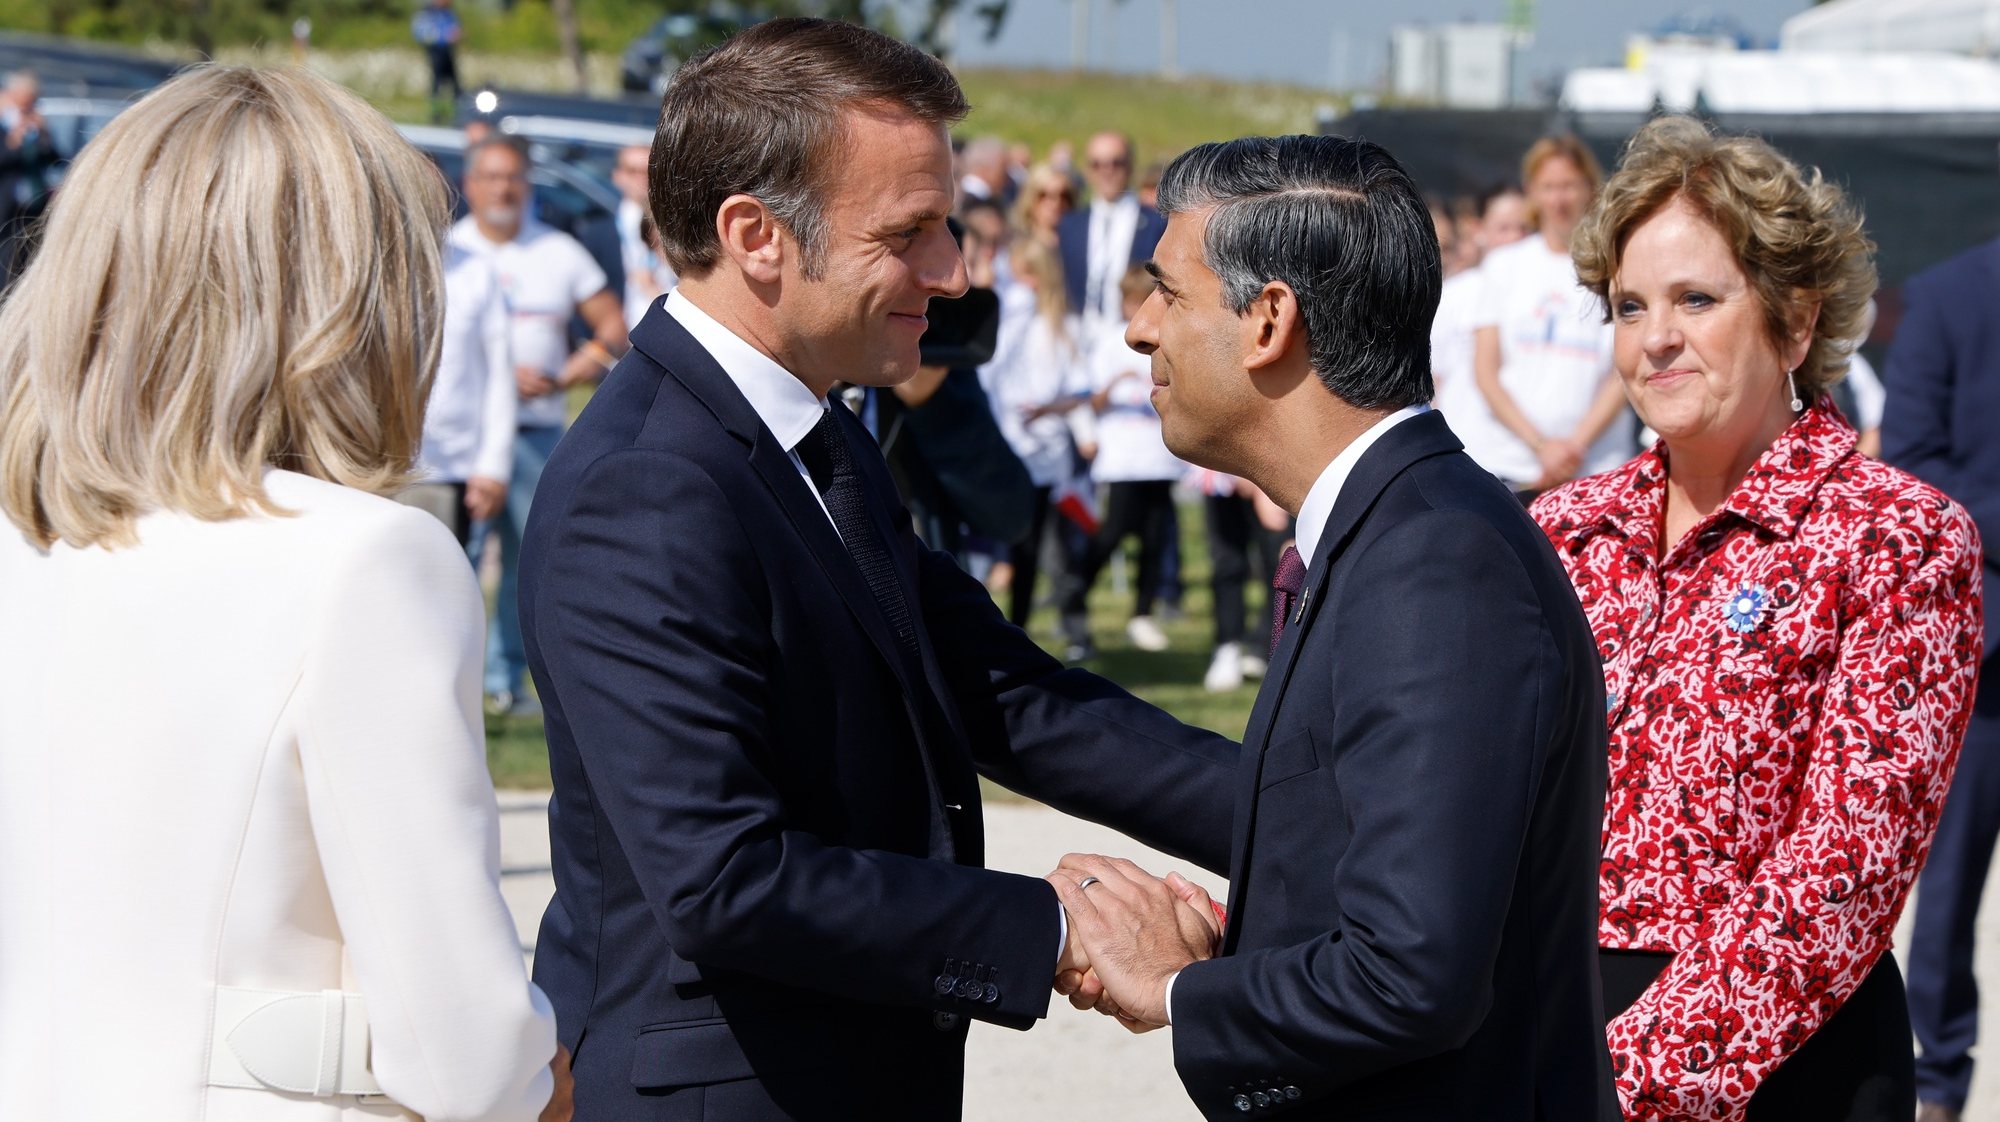 epa11392987 France&#039;s President Emmanuel Macron (L) shakes hands with Britain&#039;s Prime Minister Rishi Sunak during the UK Ministry of Defence and the Royal British Legionâ€™s commemorative ceremony marking the 80th anniversary of the World War II &#039;D-Day&#039; Allied landings in Normandy, at the World War II British Normandy Memorial near the village of Ver-sur-Mer which overlooks Gold Beach in northwestern France, 06 June 2024. The D-Day ceremonies on 06 June this year mark the 80th anniversary since the launch of &#039;Operation Overlord&#039;, a vast military operation by Allied forces in Normandy, which turned the tide of World War II, eventually leading to the liberation of occupied France and the end of the war against Nazi Germany.  EPA/LUDOVIC MARIN / POOL  MAXPPP OUT